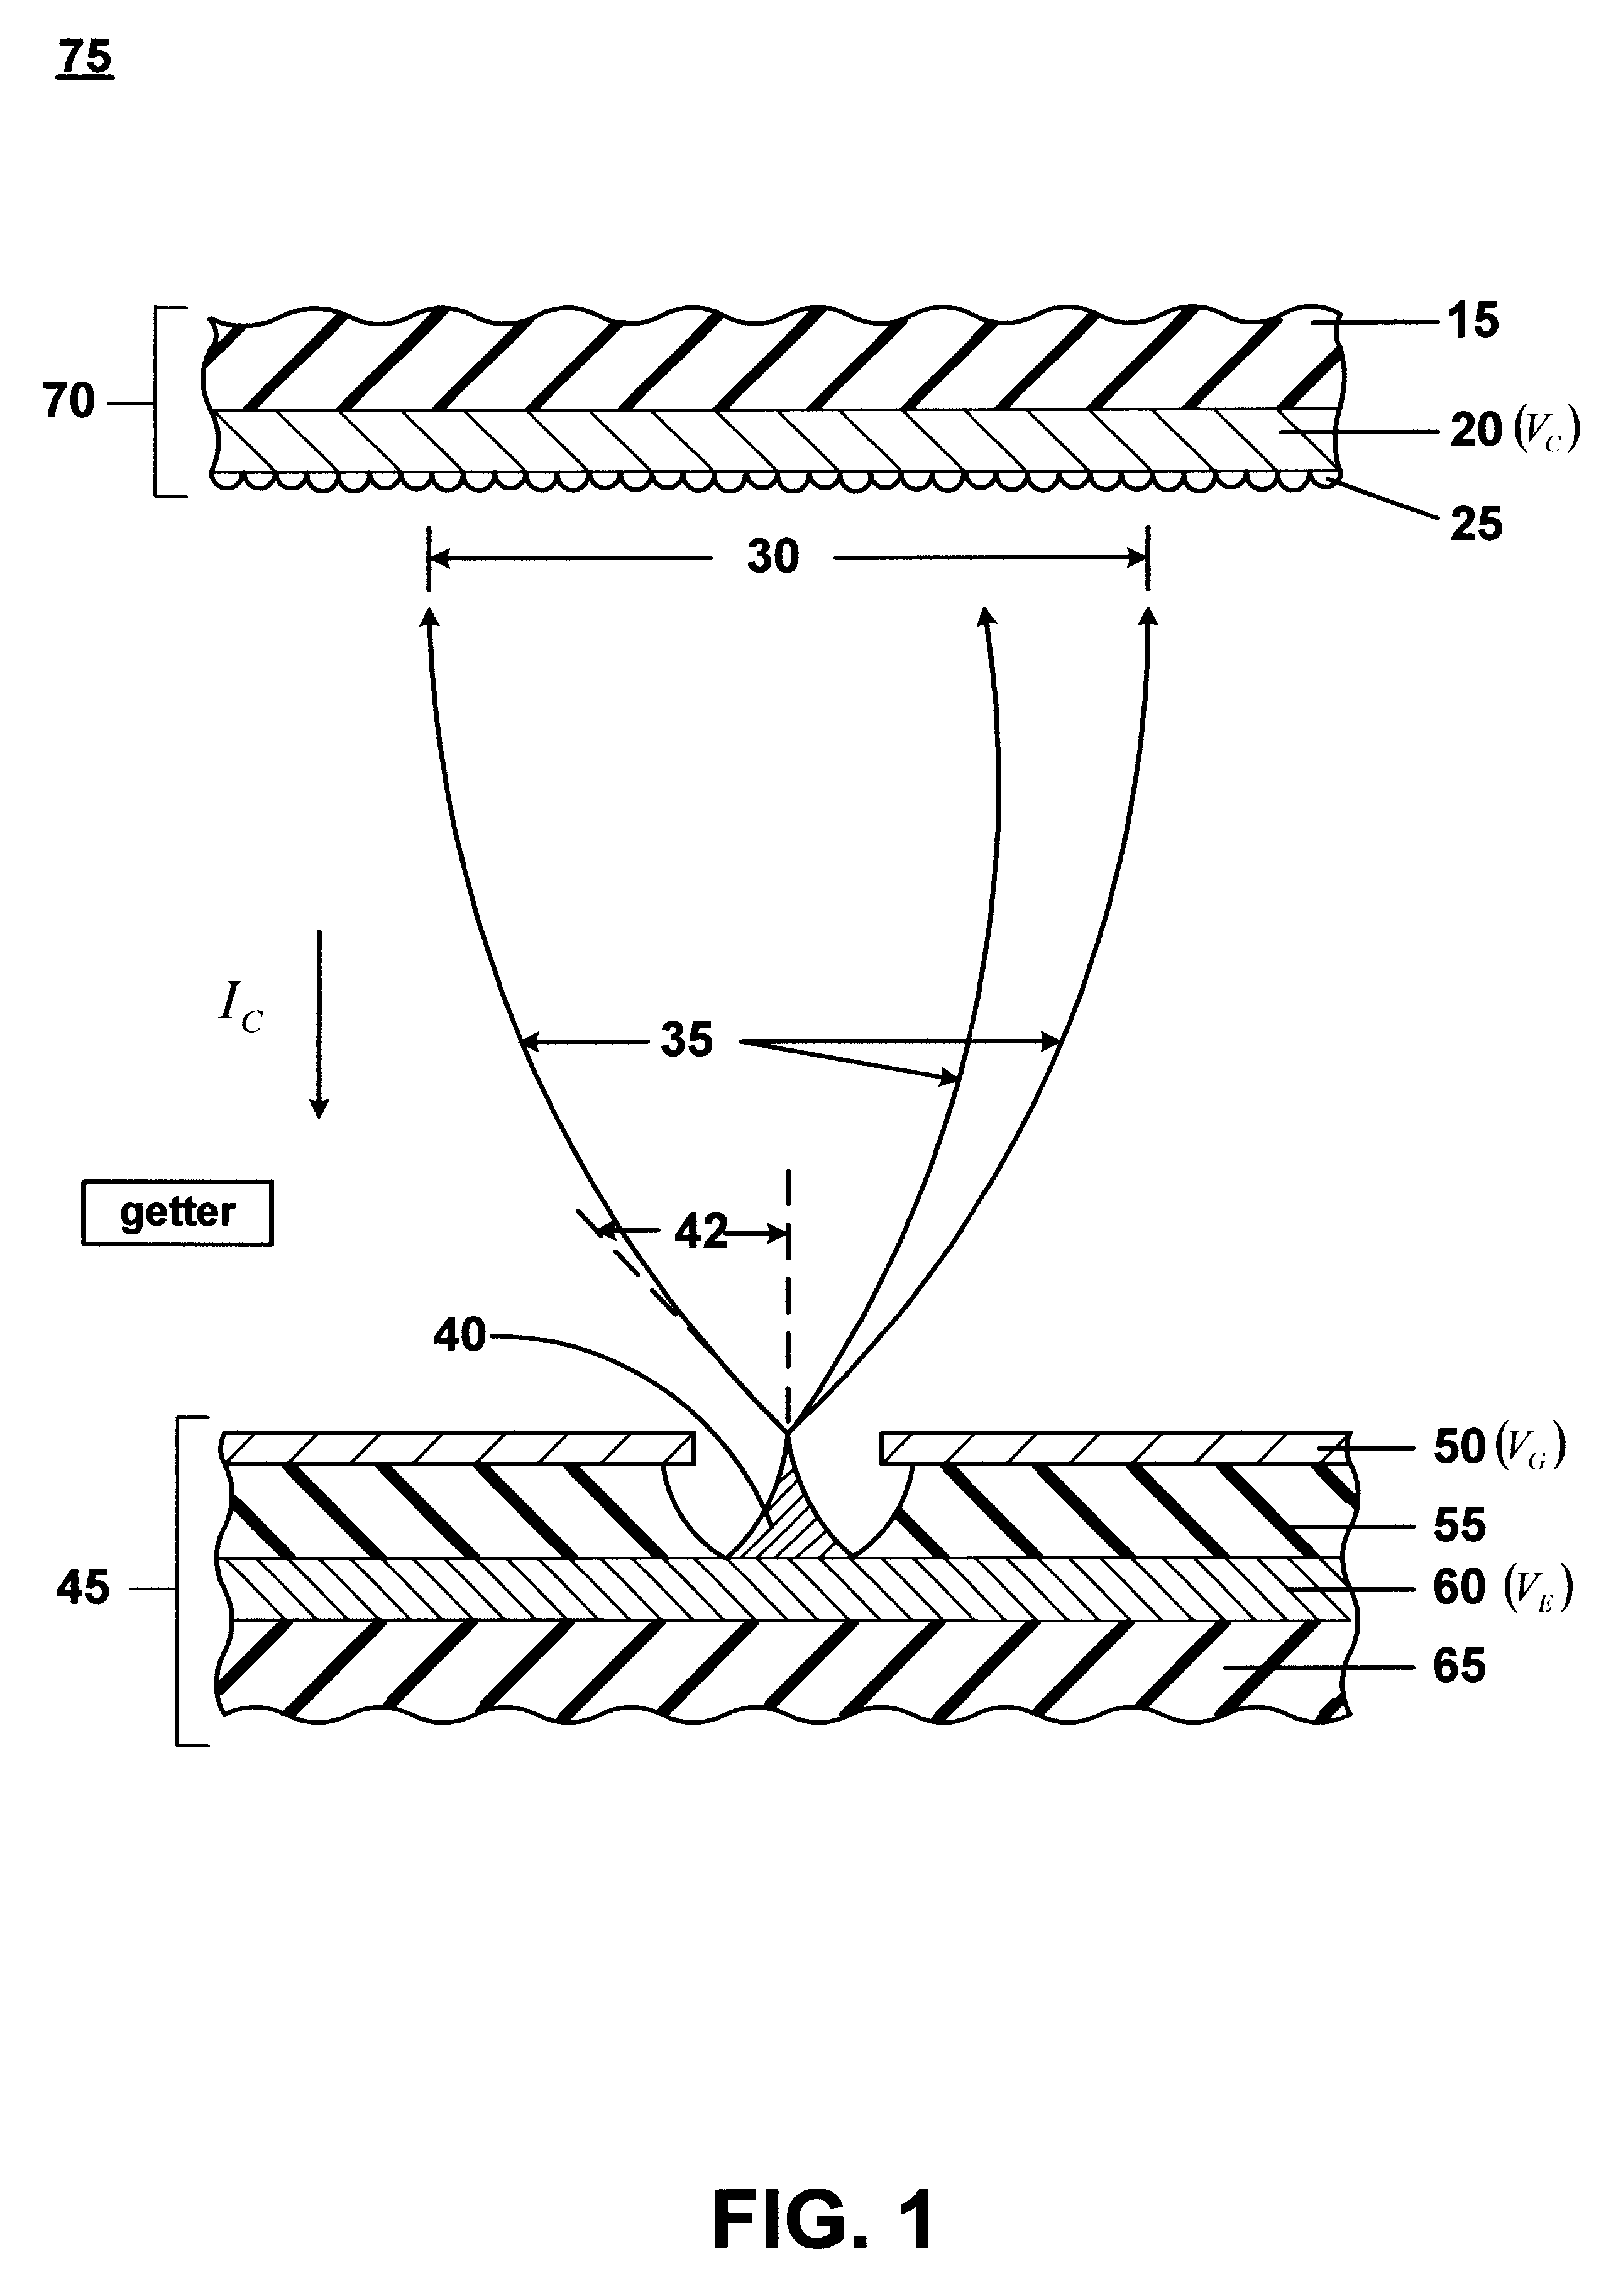 Procedures and apparatus for turning-on and turning-off elements within a field emission display device